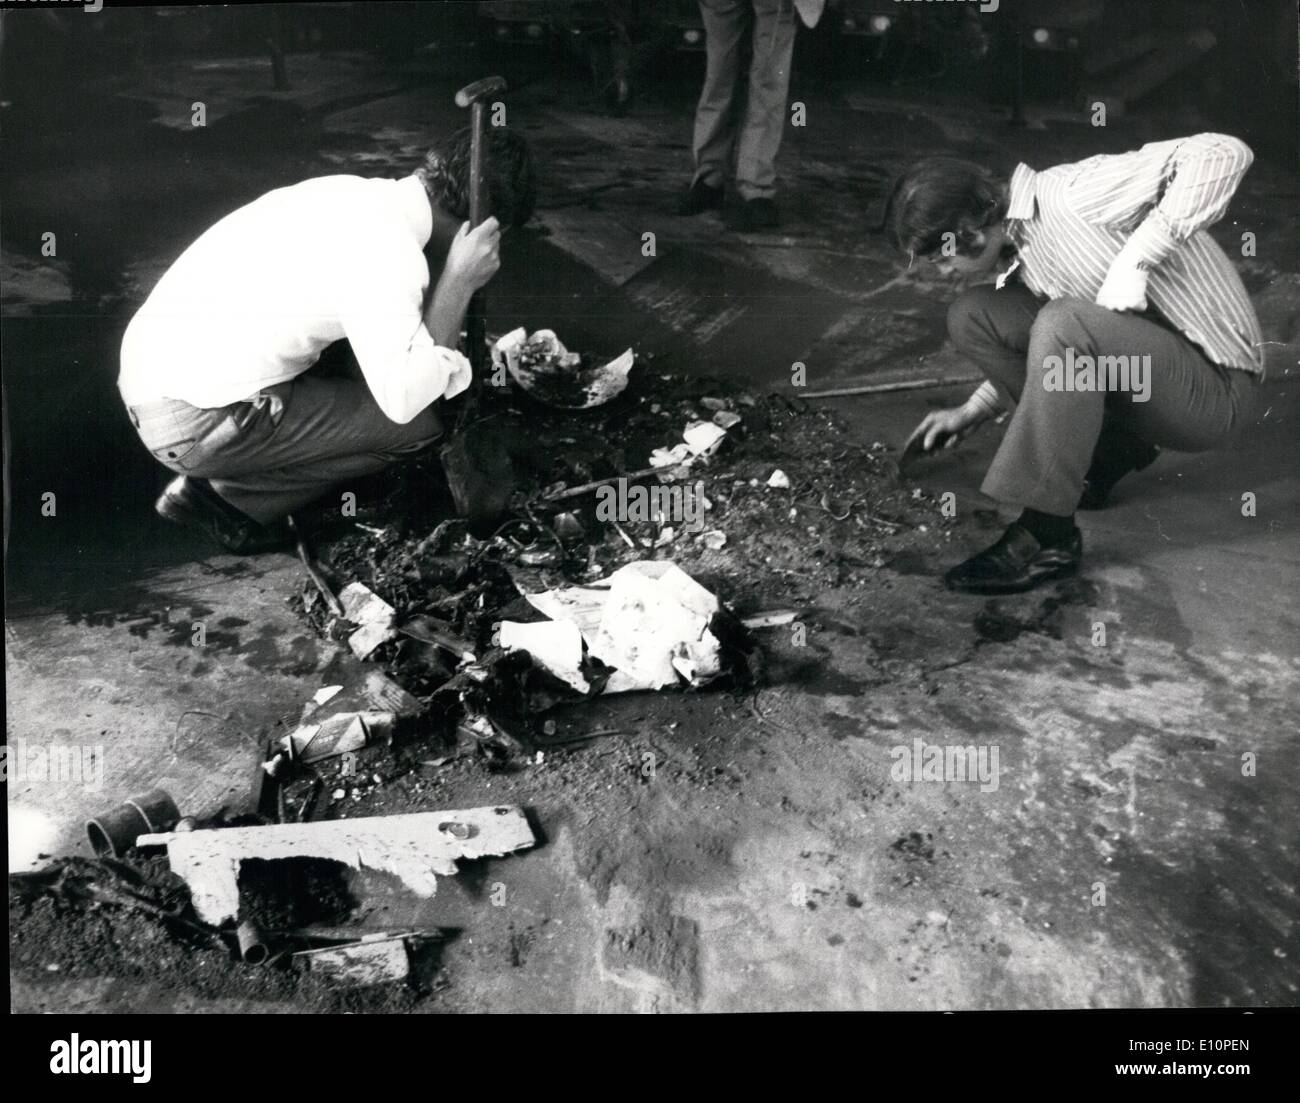 Sep. 09, 1973 - Bomb Explosion at Barracks in Chelsea. Five people were injured and several Army vehicles damaged when a bomb exploded in a garage at the Duke of York barracks in Kings Road, Chelsea, this morning. Keystone Photo Shows: Scotland Yard detectives sifting bomb debris, in the garage of the barracks today. Stock Photo